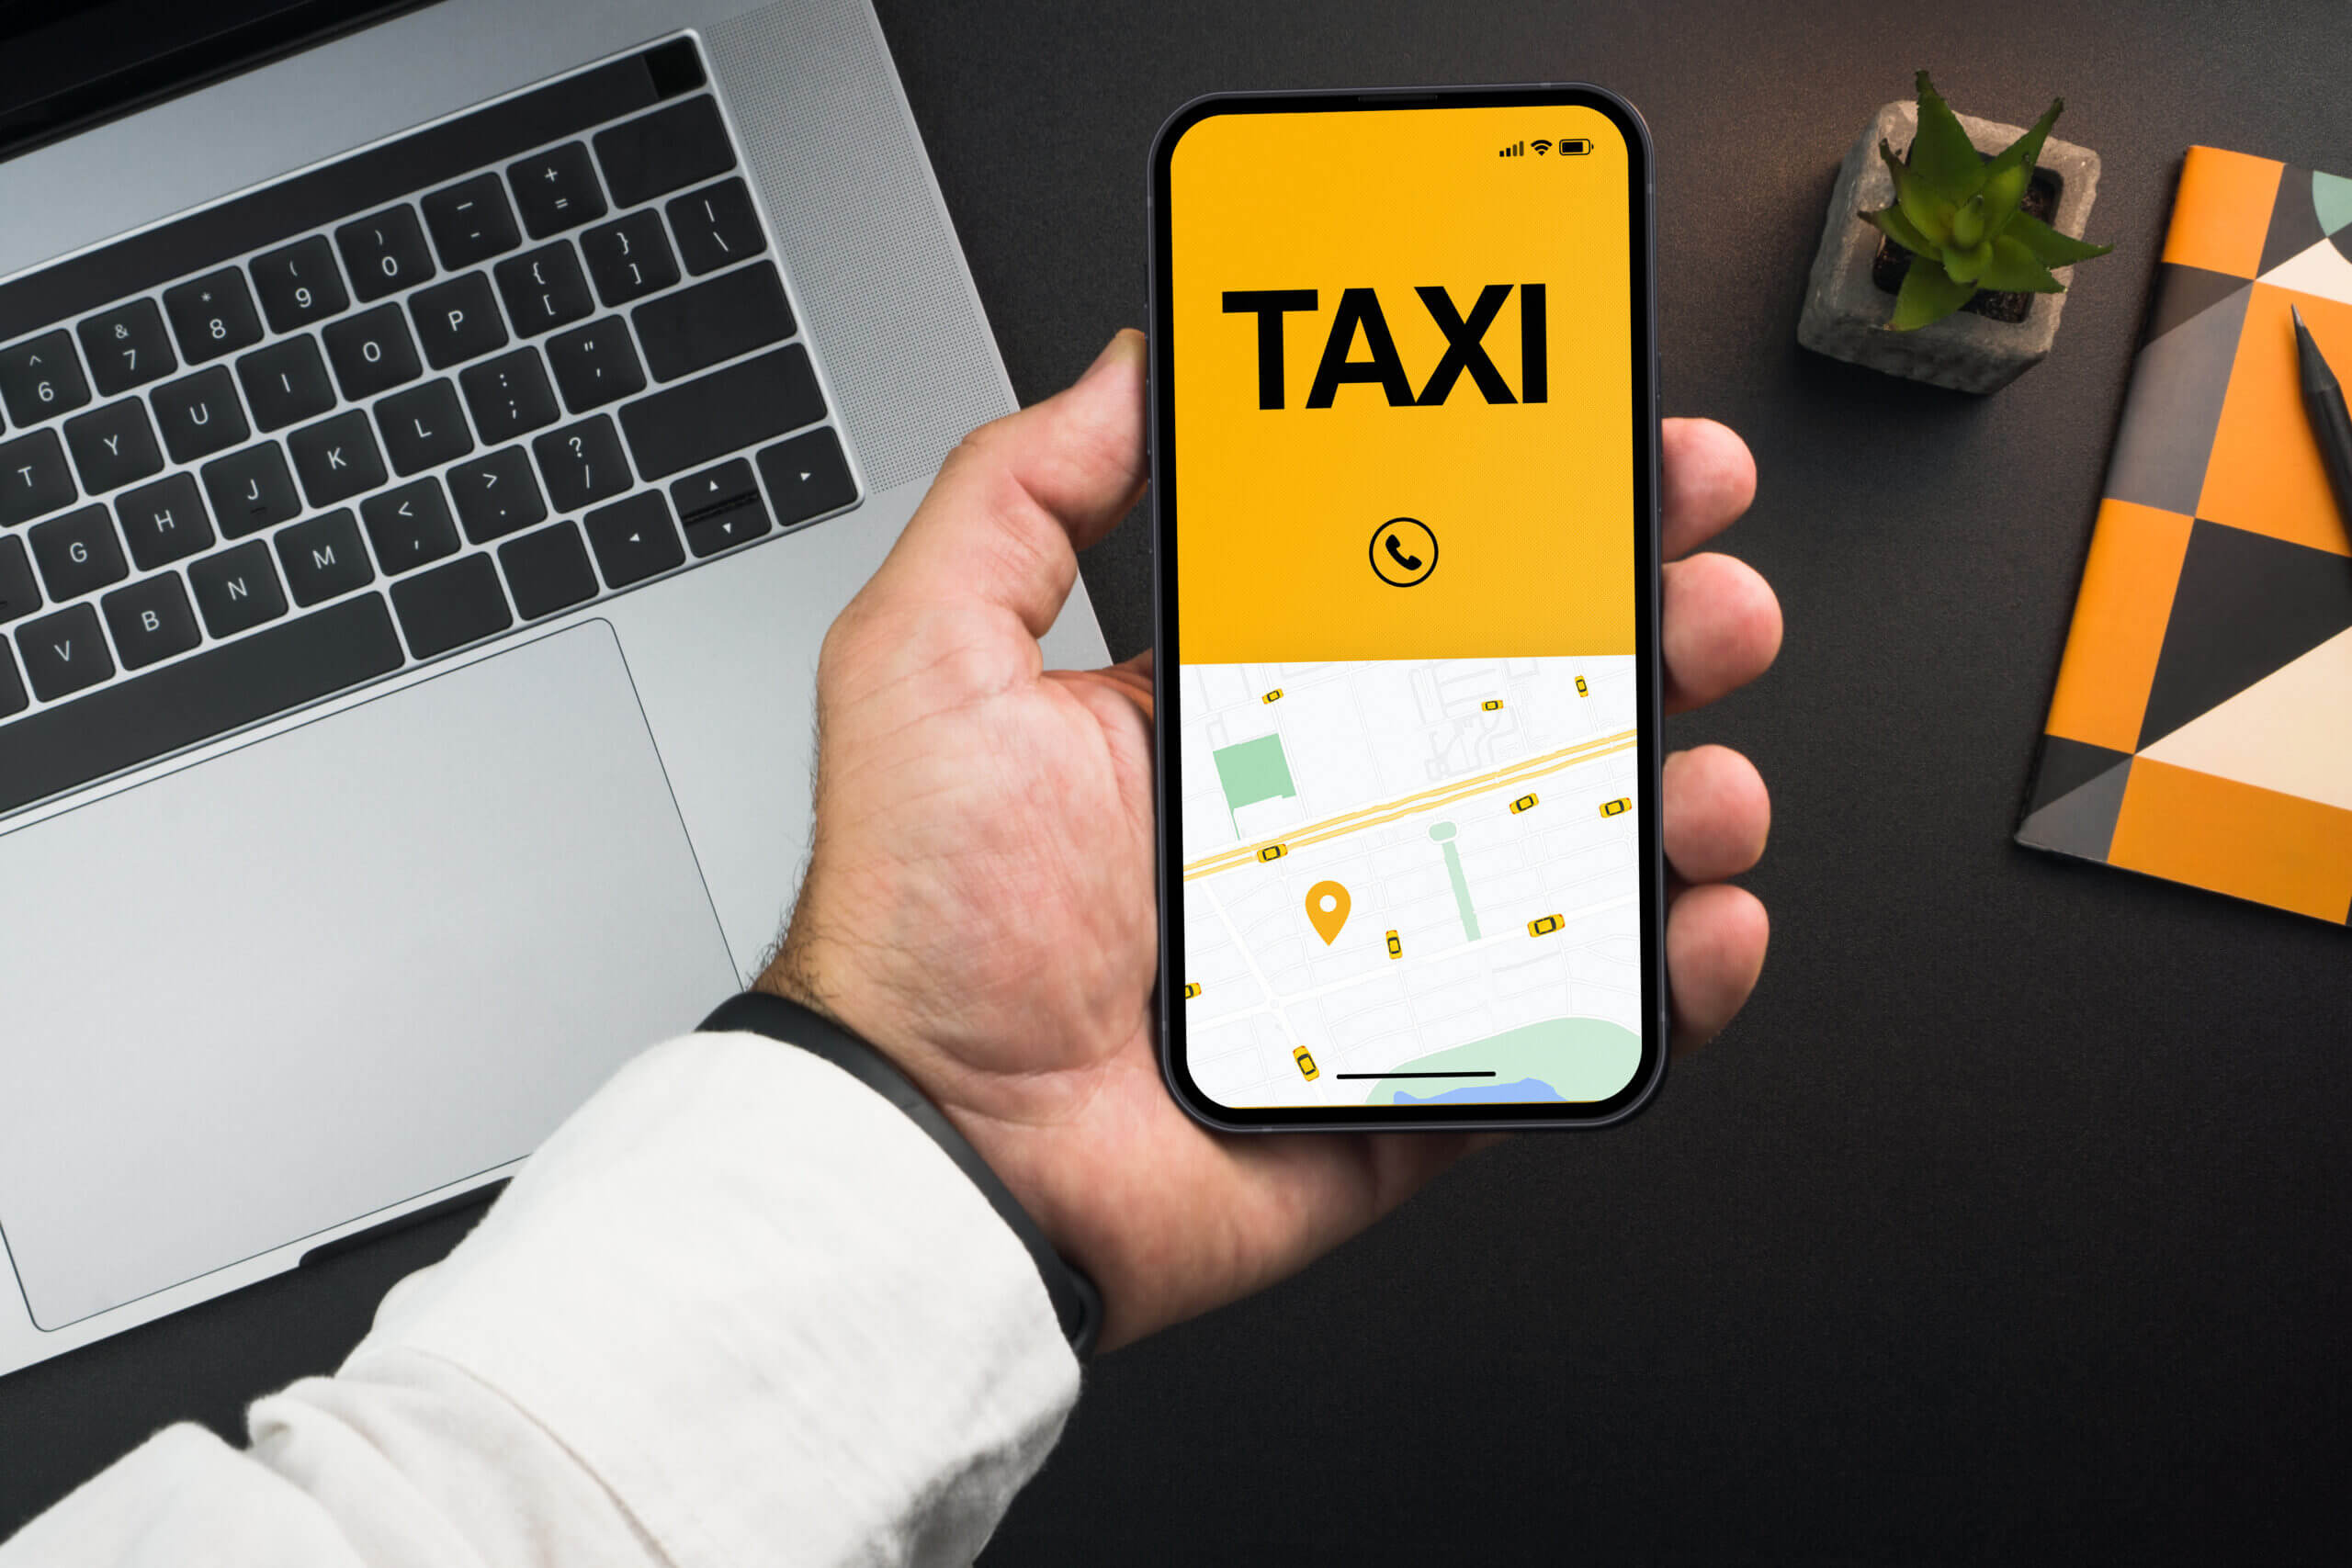 Taxi Receipt Template Feature Image